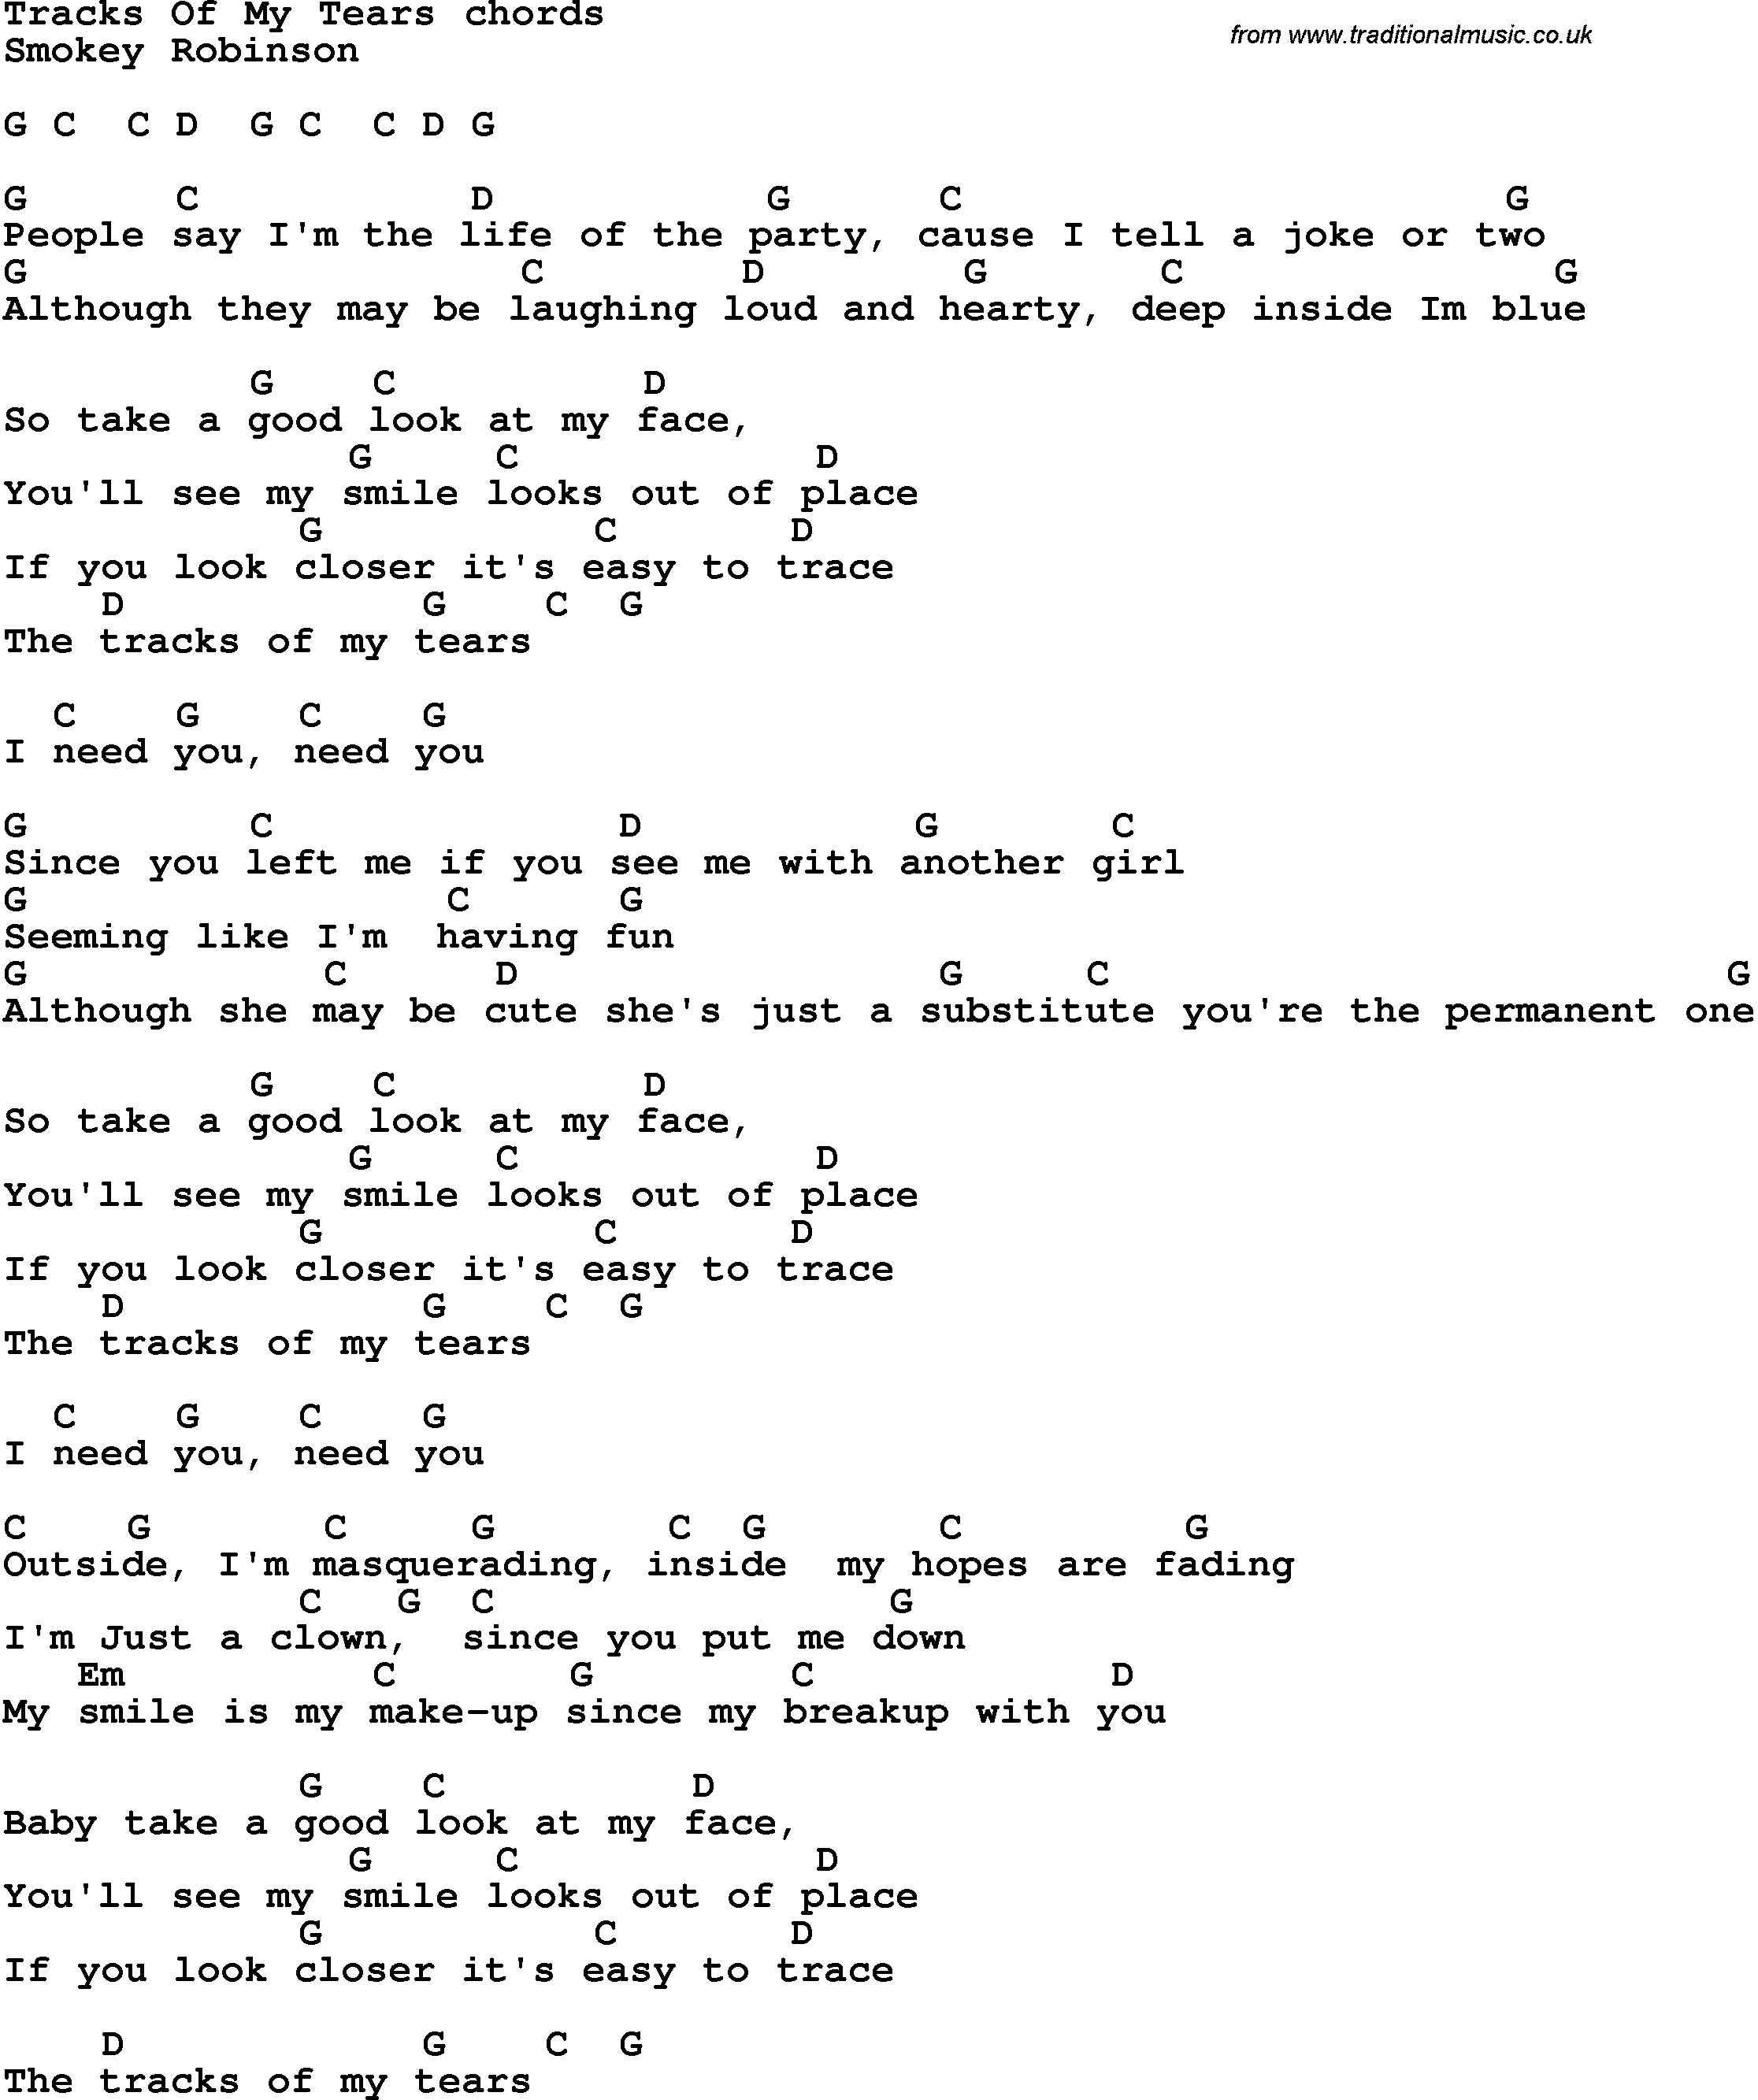 Song Lyrics with guitar chords for Tracks Of My Tears